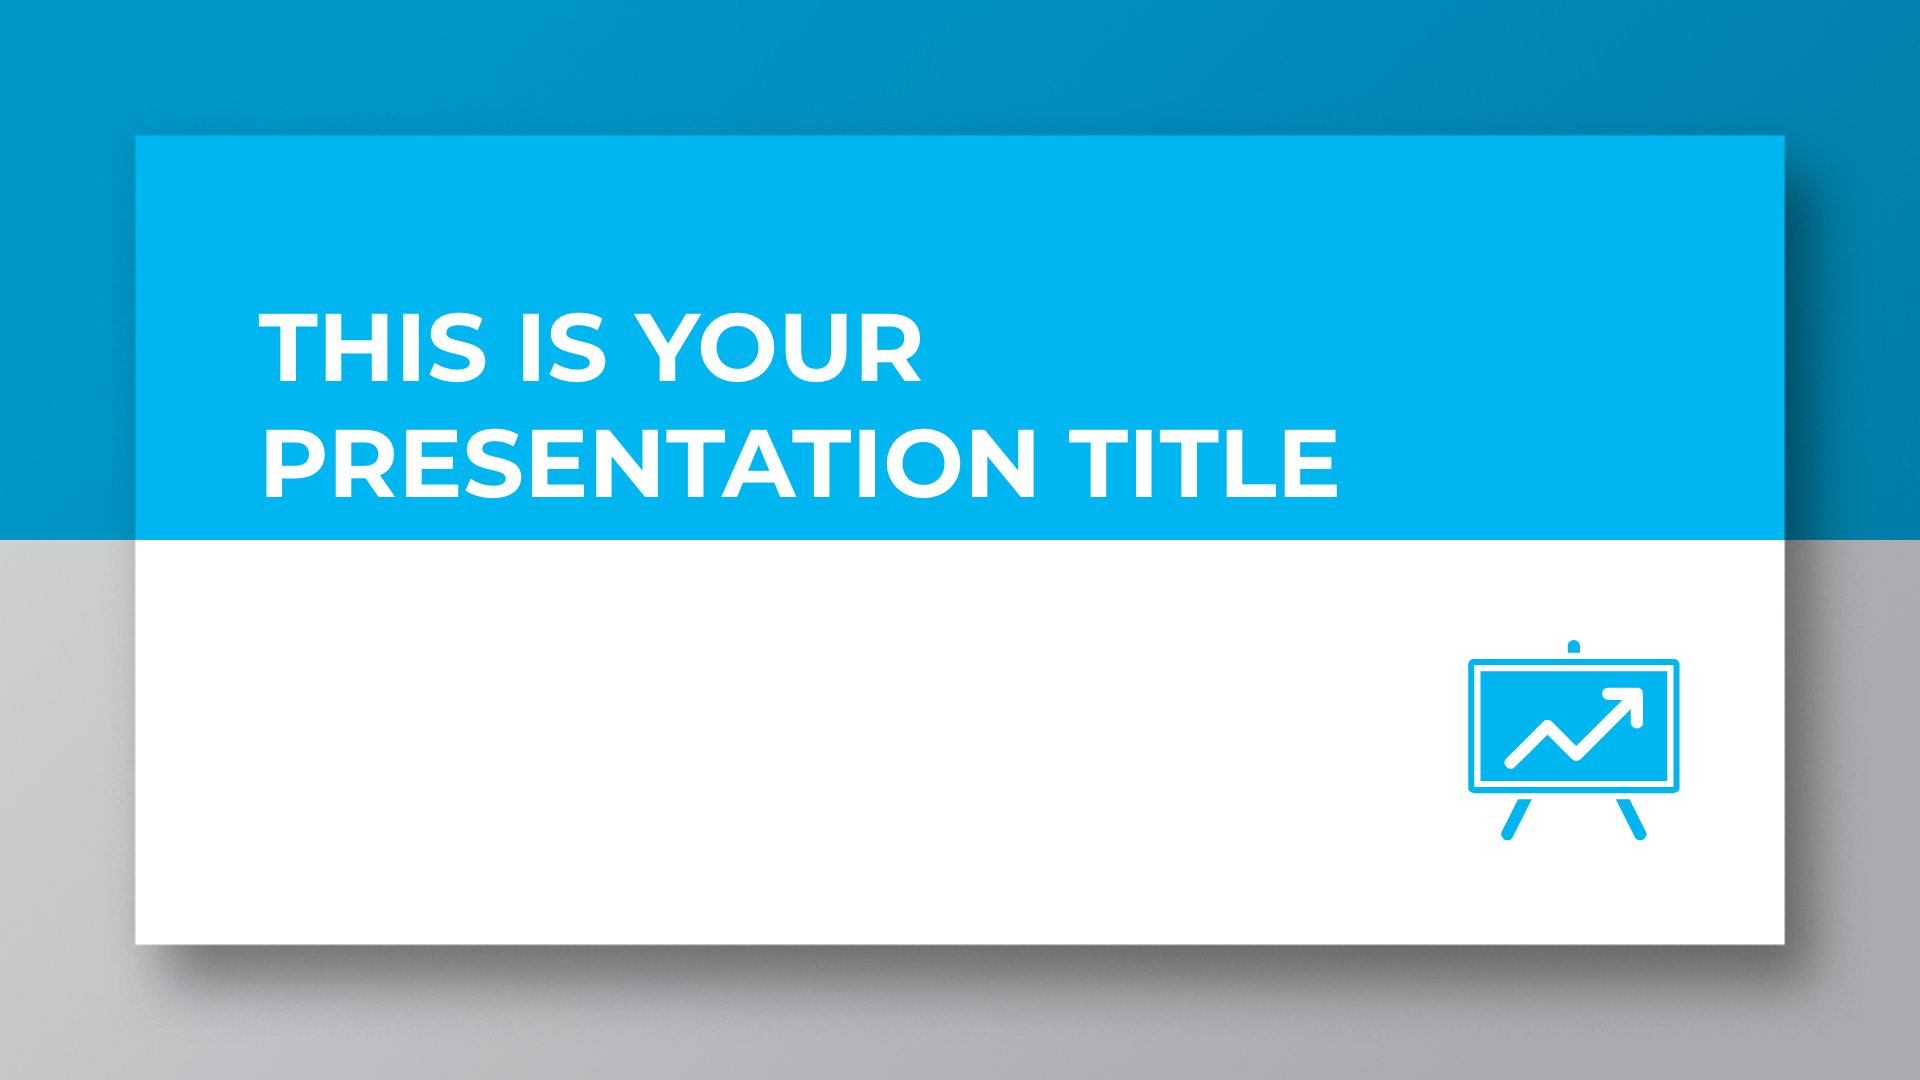 Free professional and corporate presentation - Powerpoint template or Google Slides theme